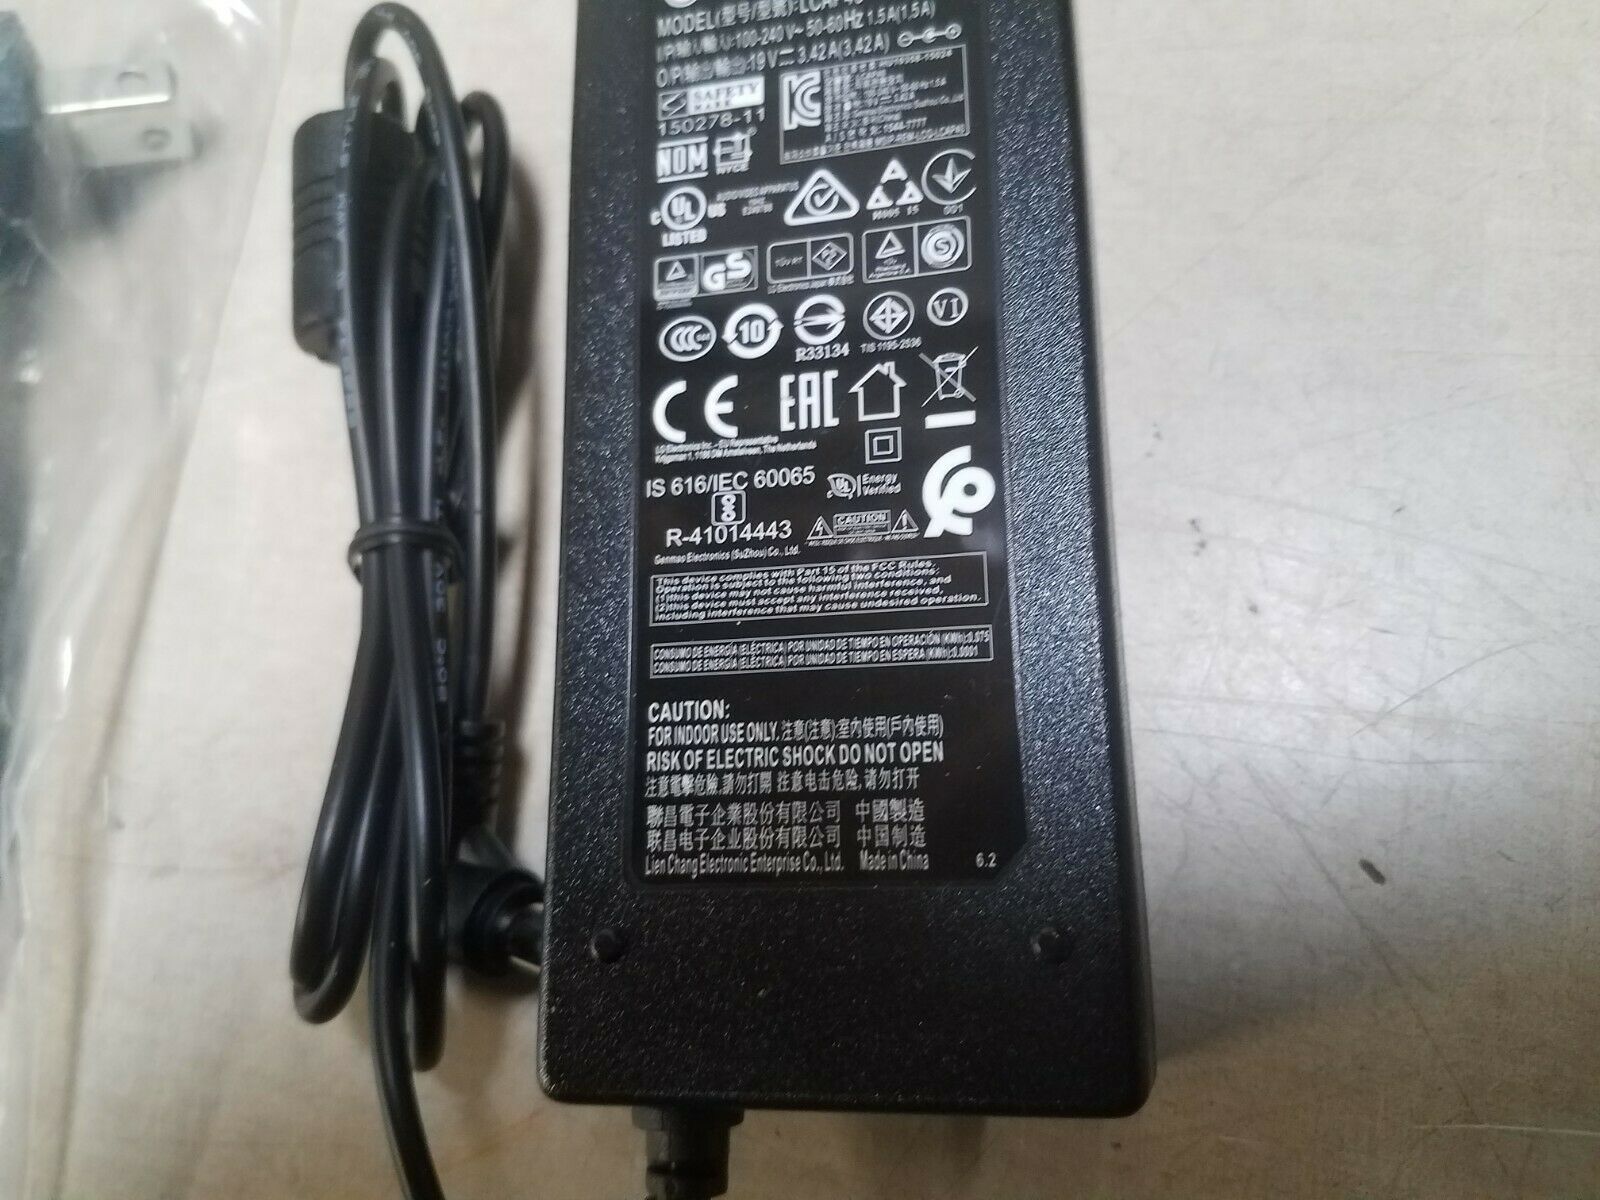 NEW LG Electronics LCAP40 19V 3.42A AC Adapter for 49LJ5100 LED TV Power Adapter